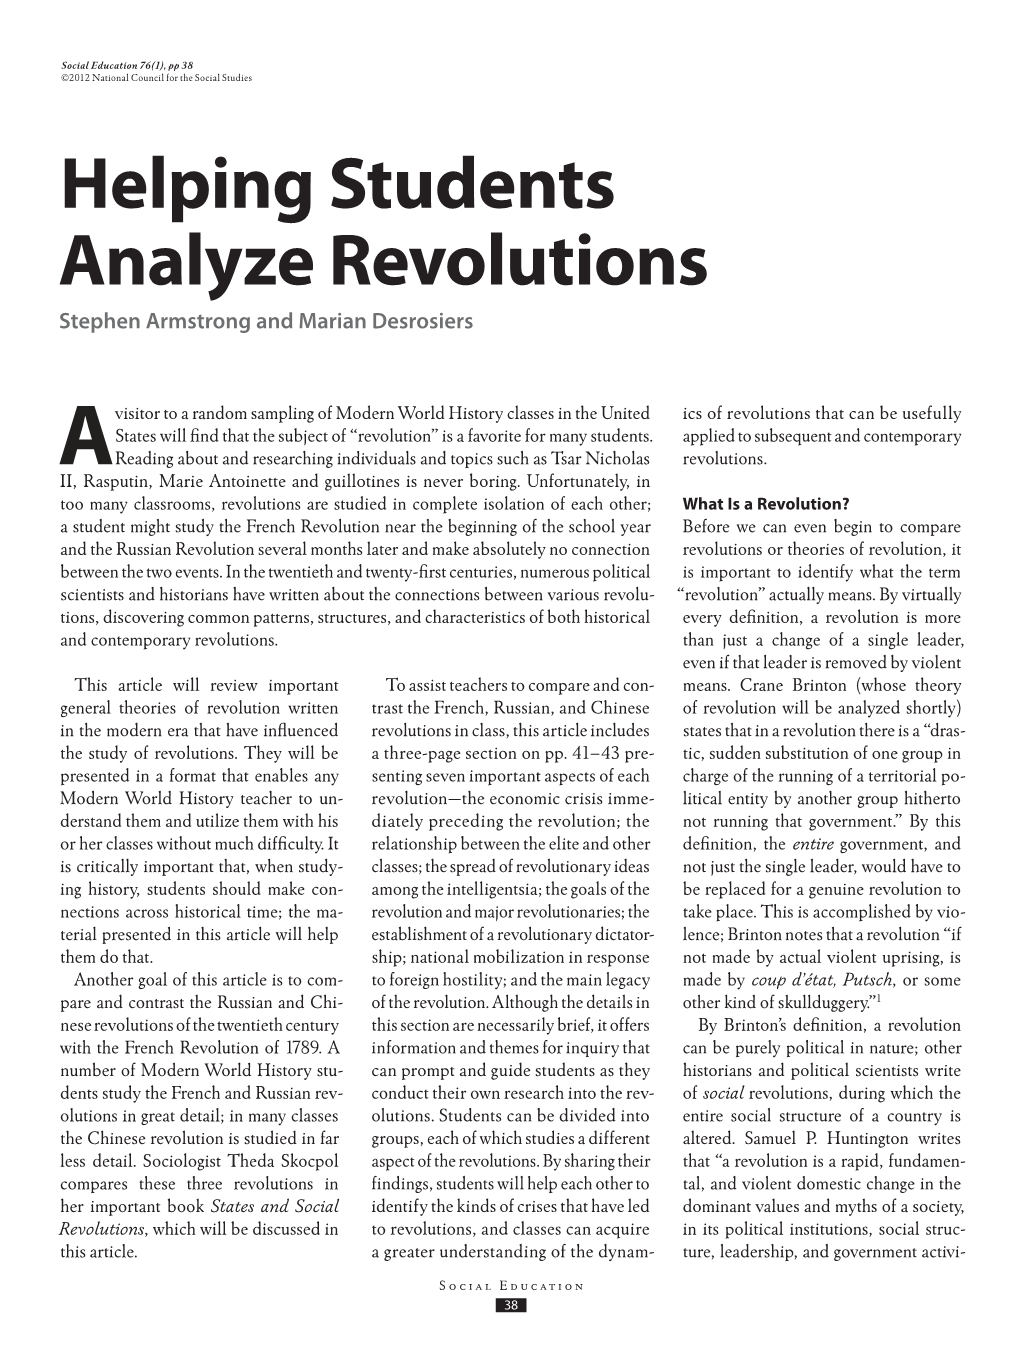 Helping Students Analyze Revolutions Stephen Armstrong and Marian Desrosiers